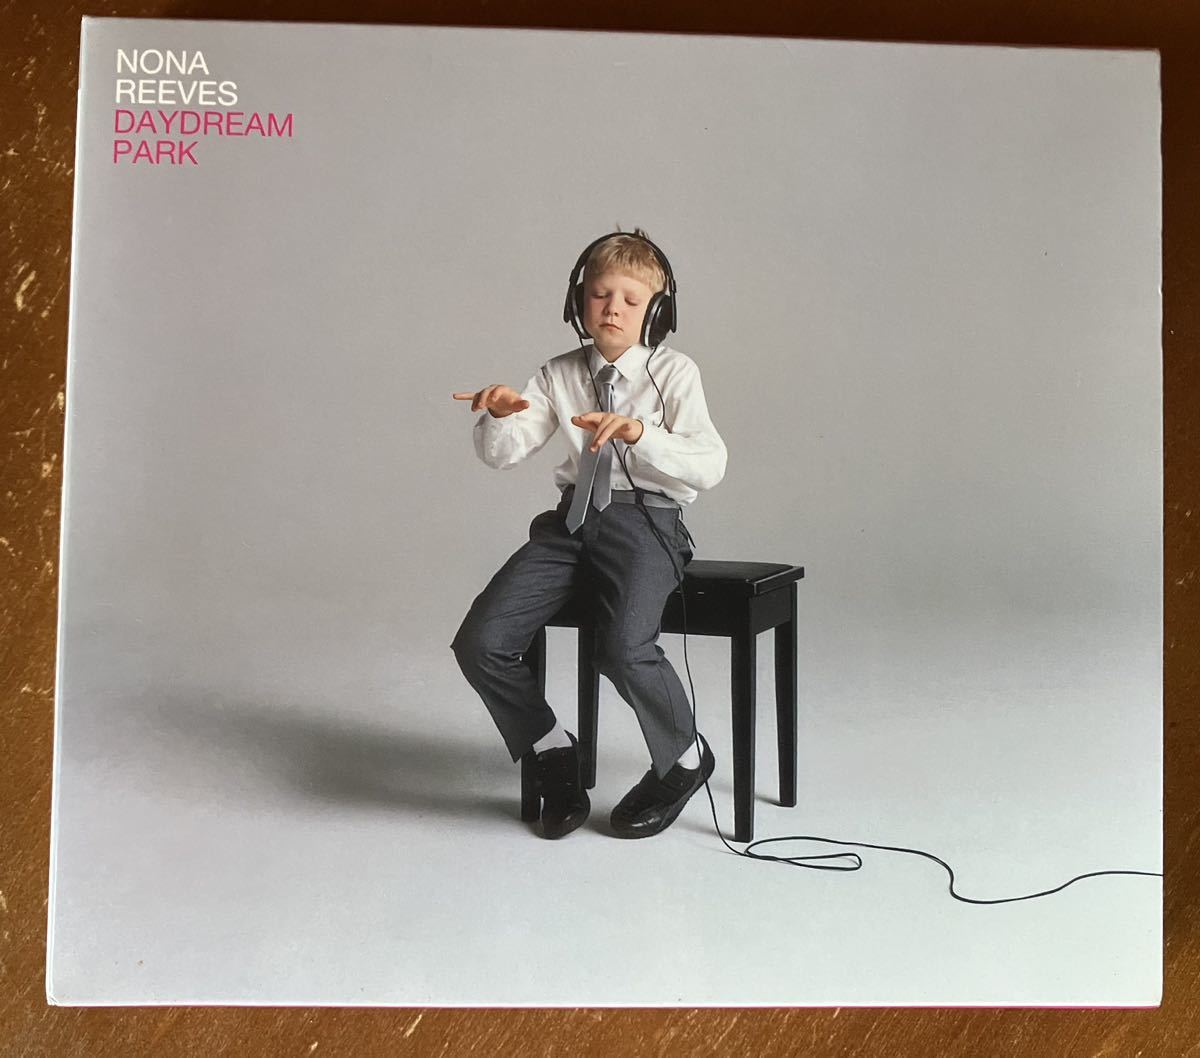 Nona reeves 初回限定盤　daydream park CD live DVD ノーナリーヴス_画像1